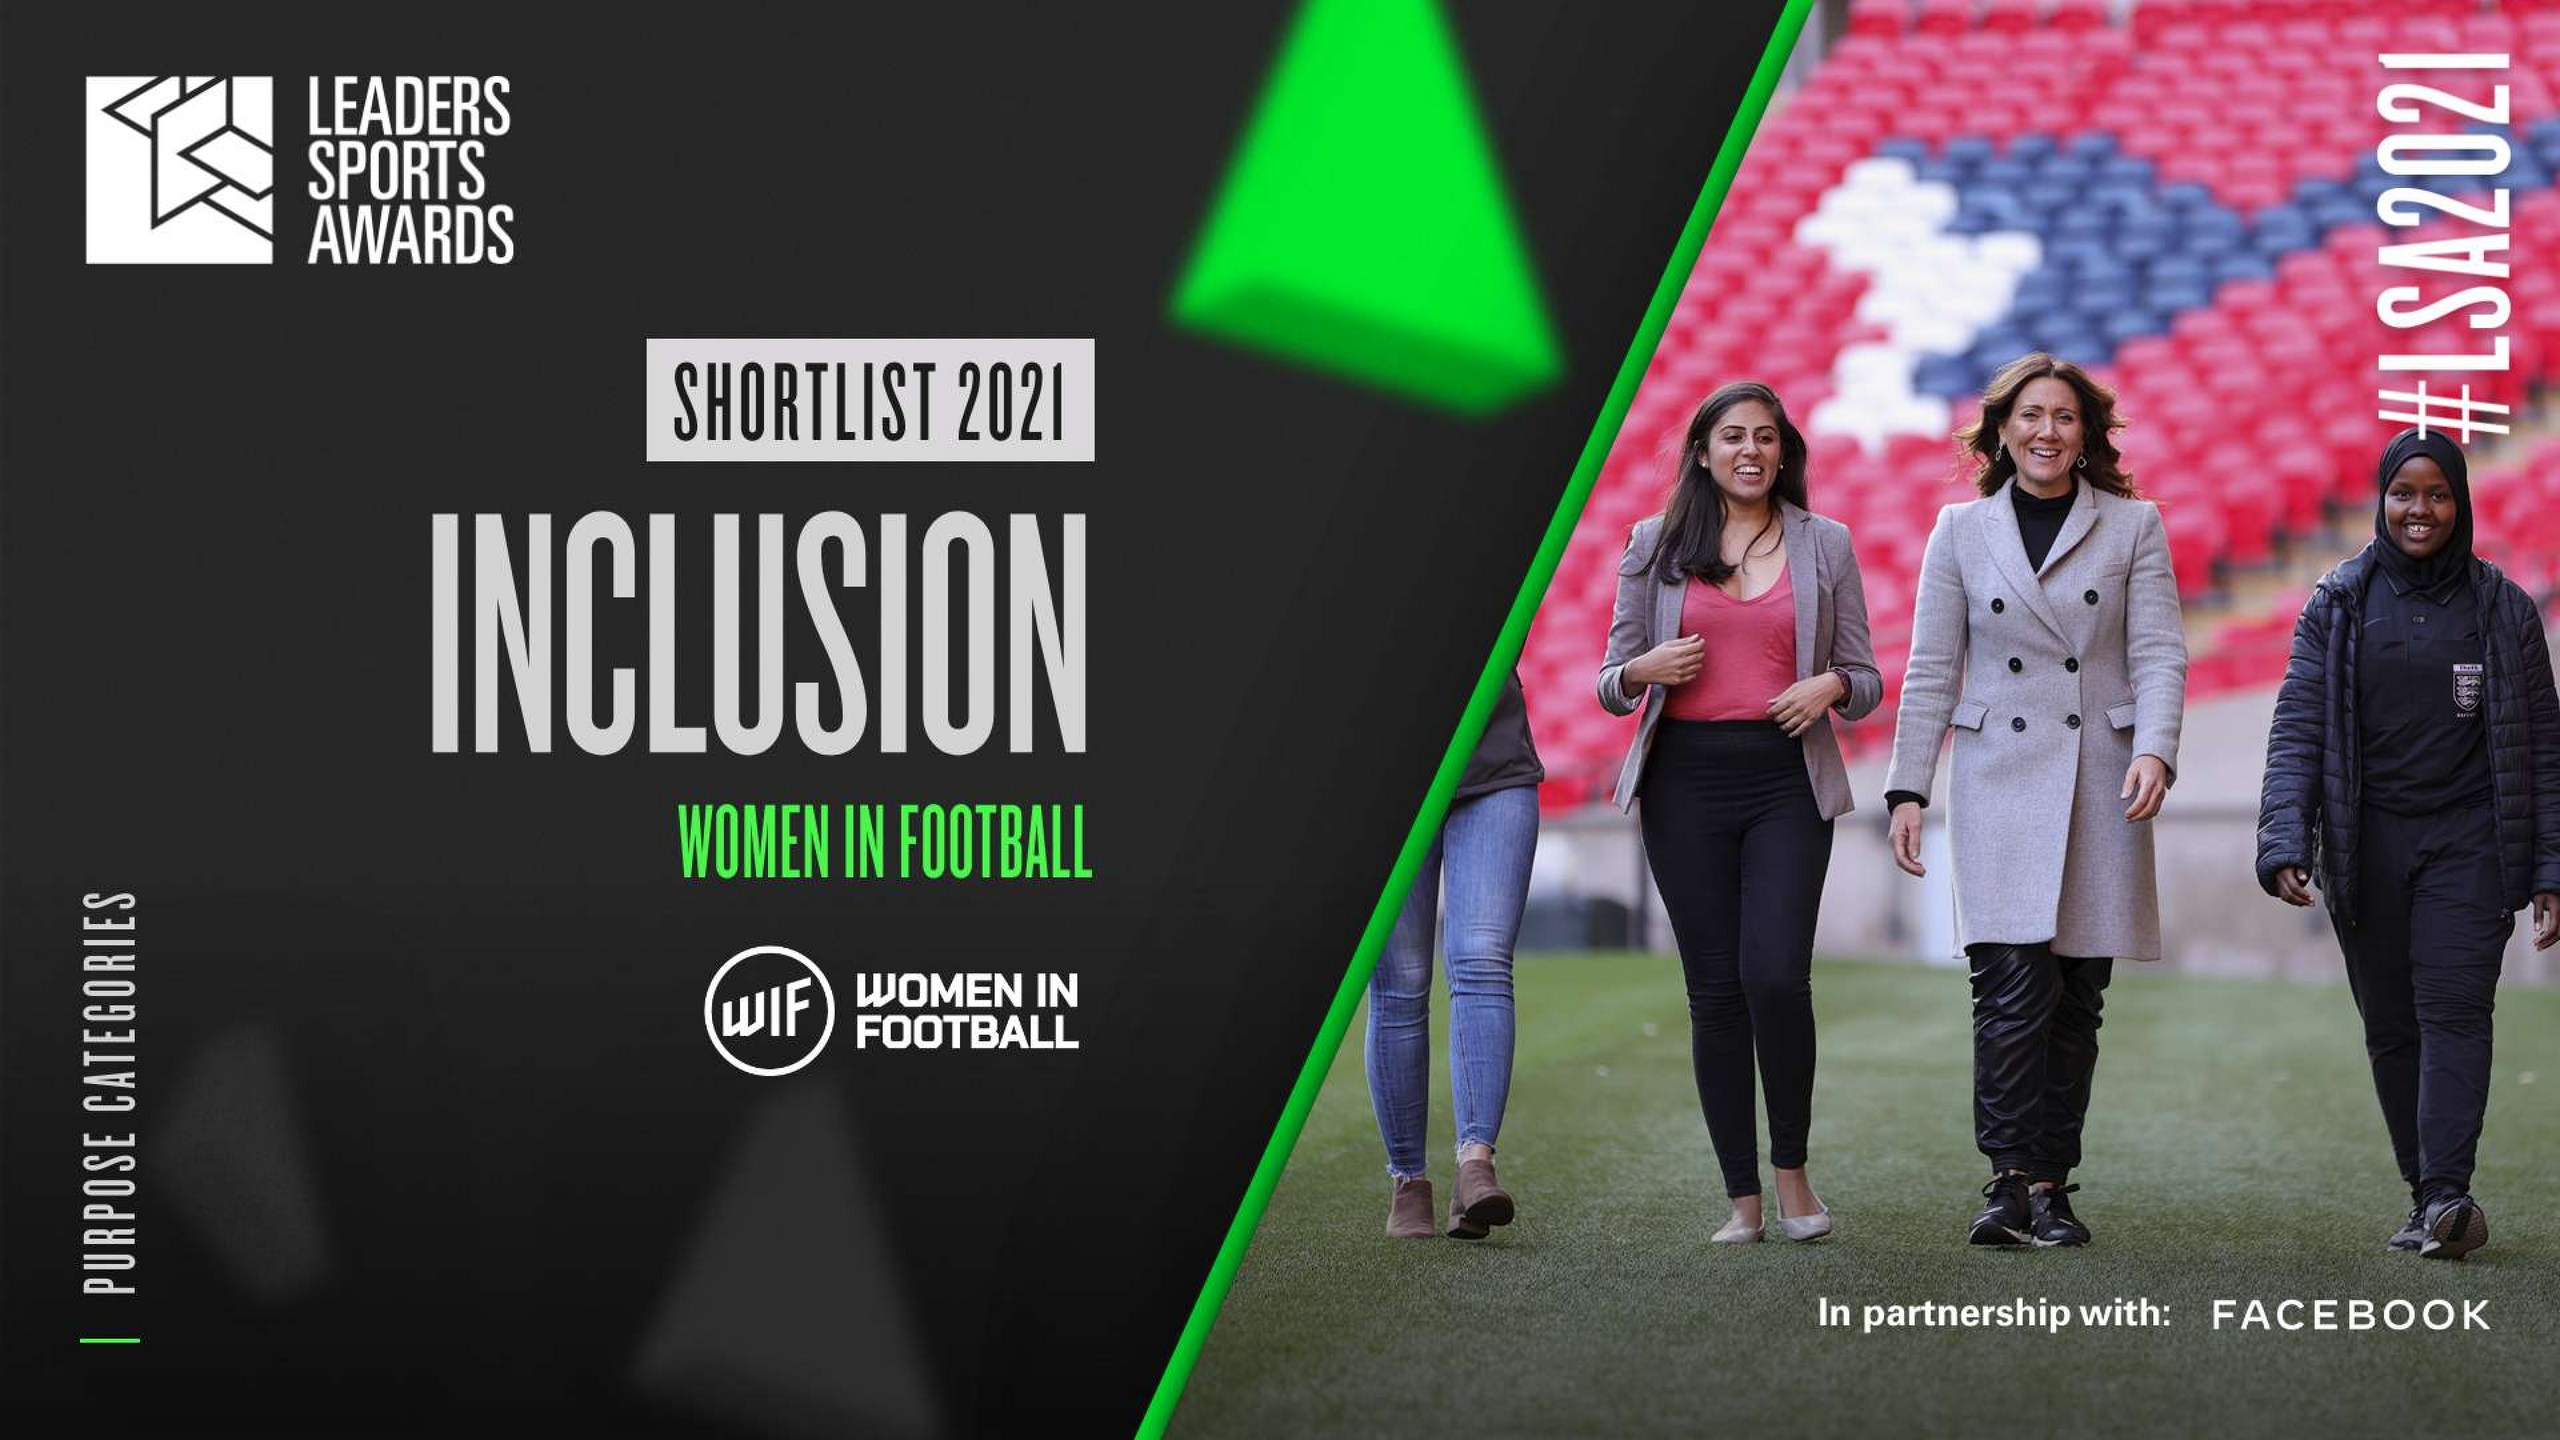 Leaders Sports Awards 2021 Creative for Women in Football